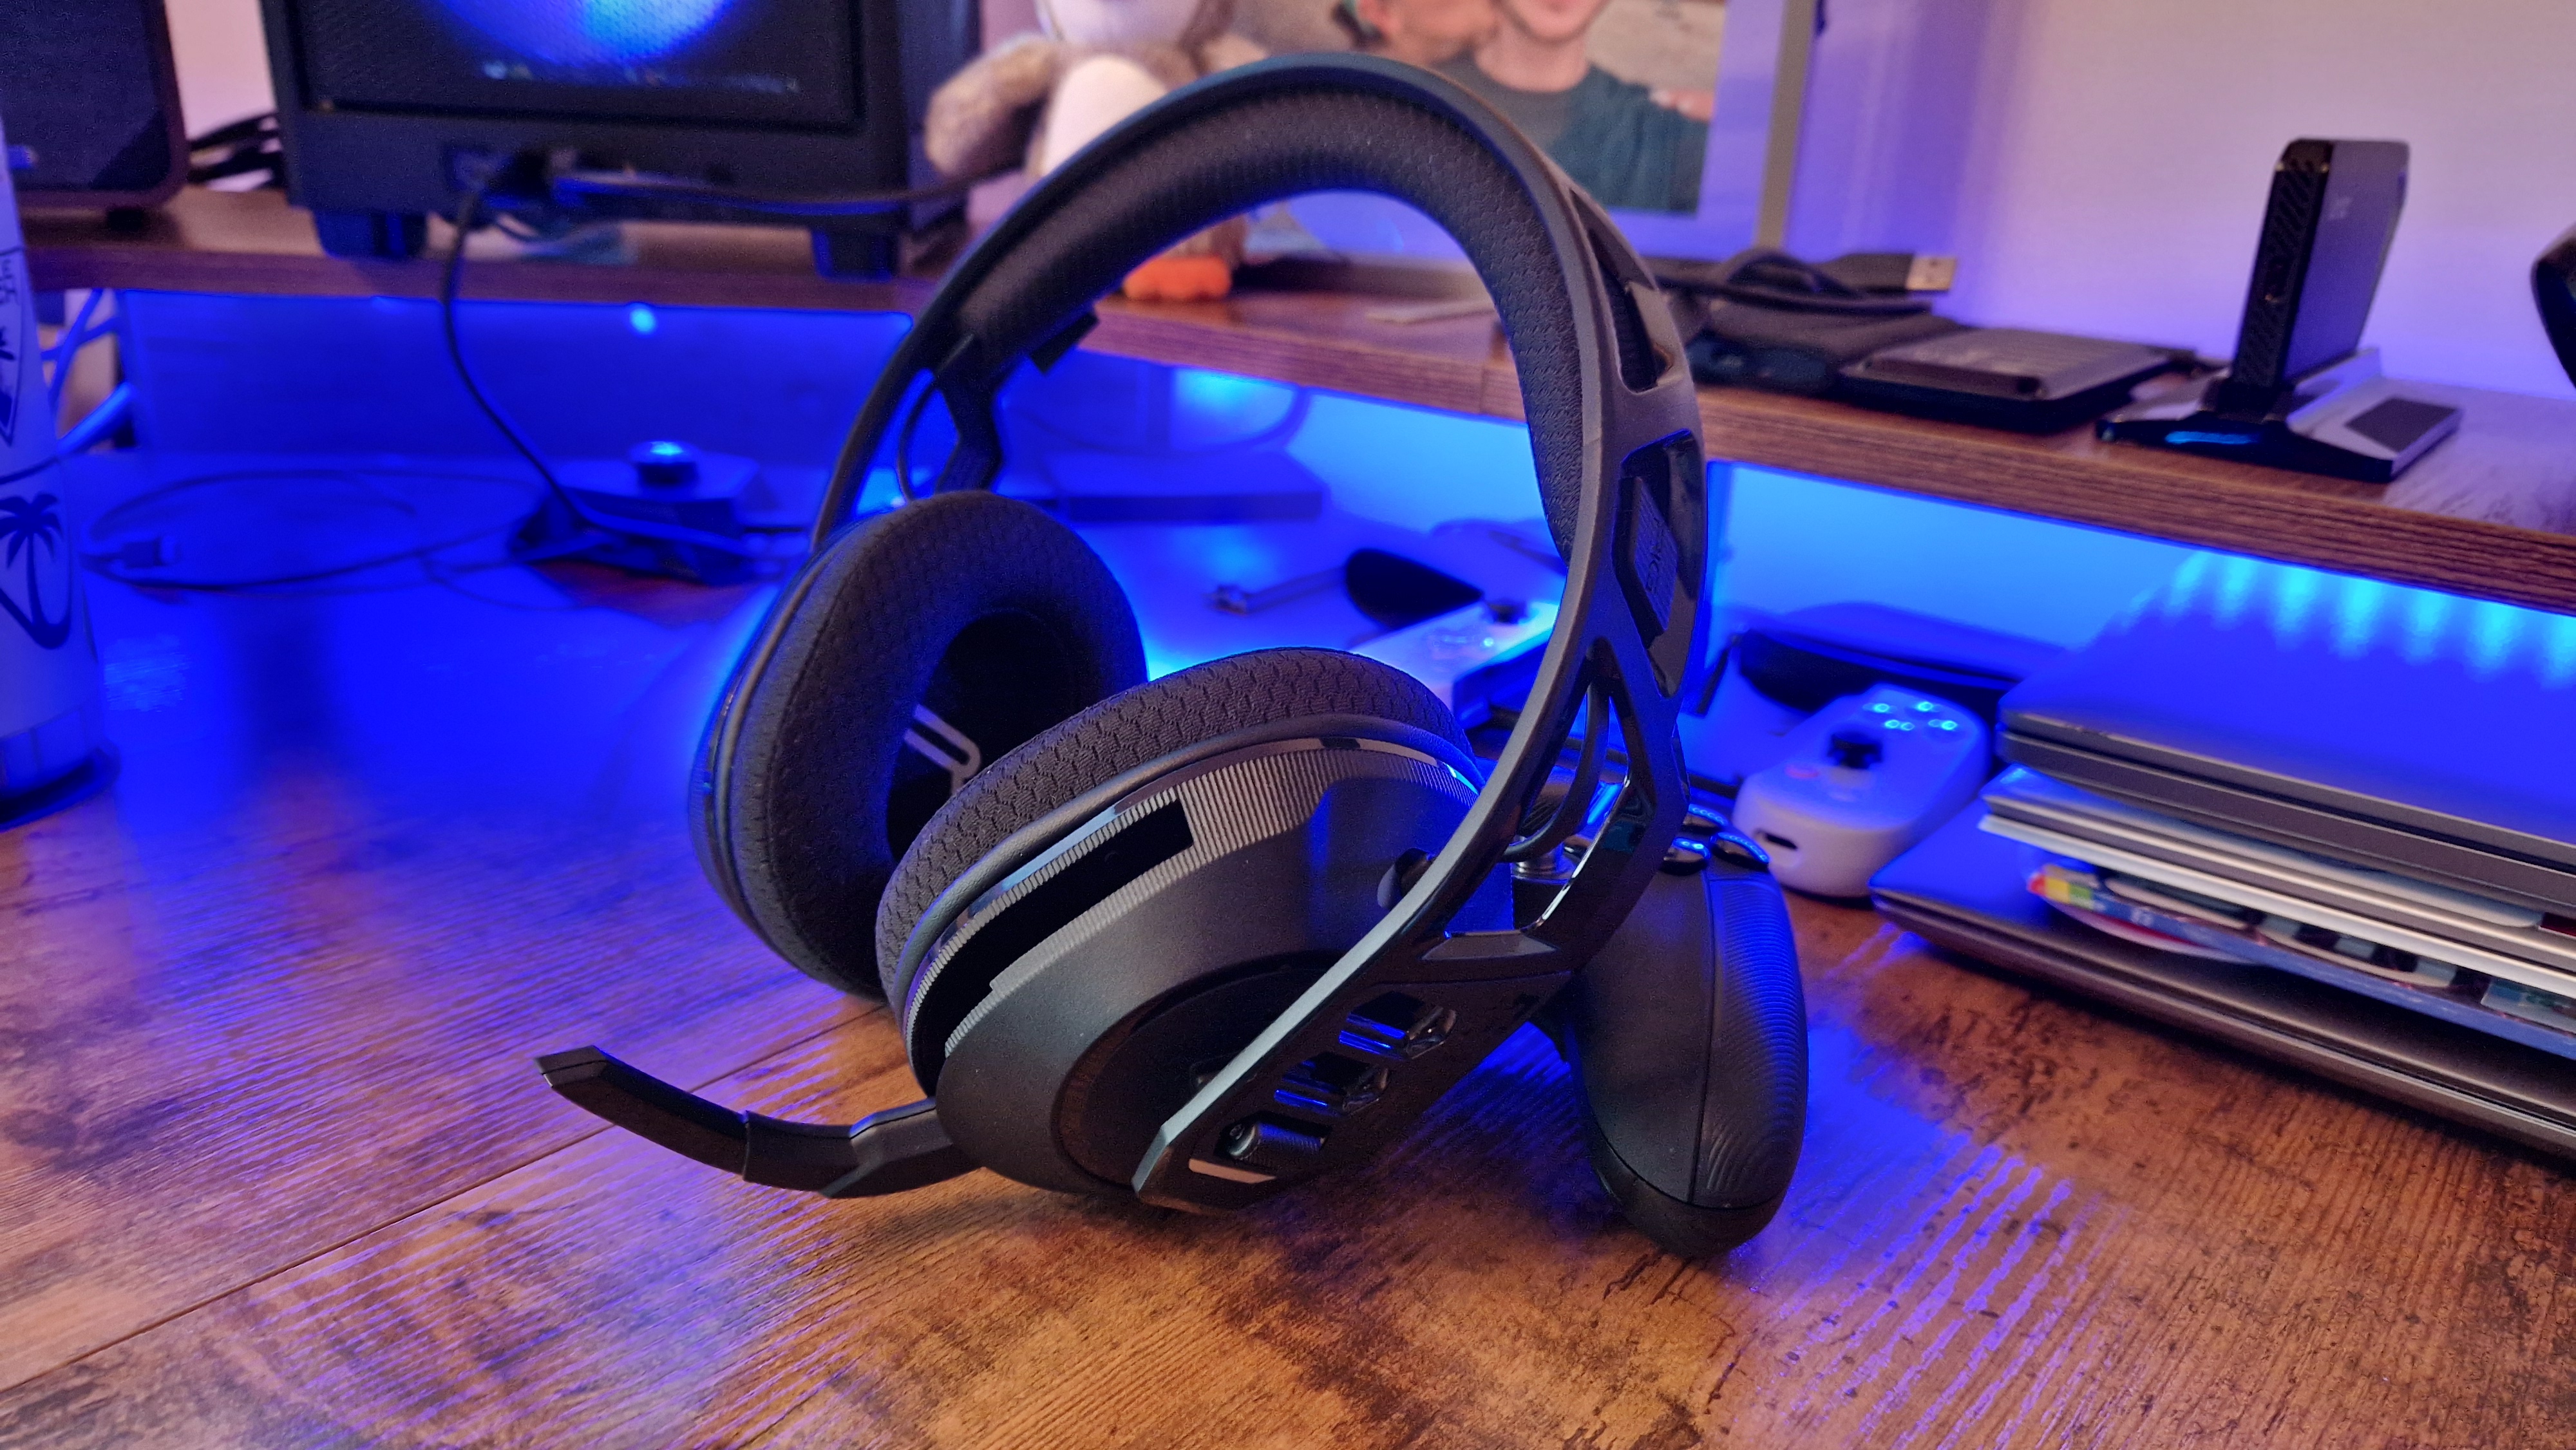 Nacon RIG 600 Pro gaming headset with its mic flipped down, propped up against a Nacon controller with blue lighting